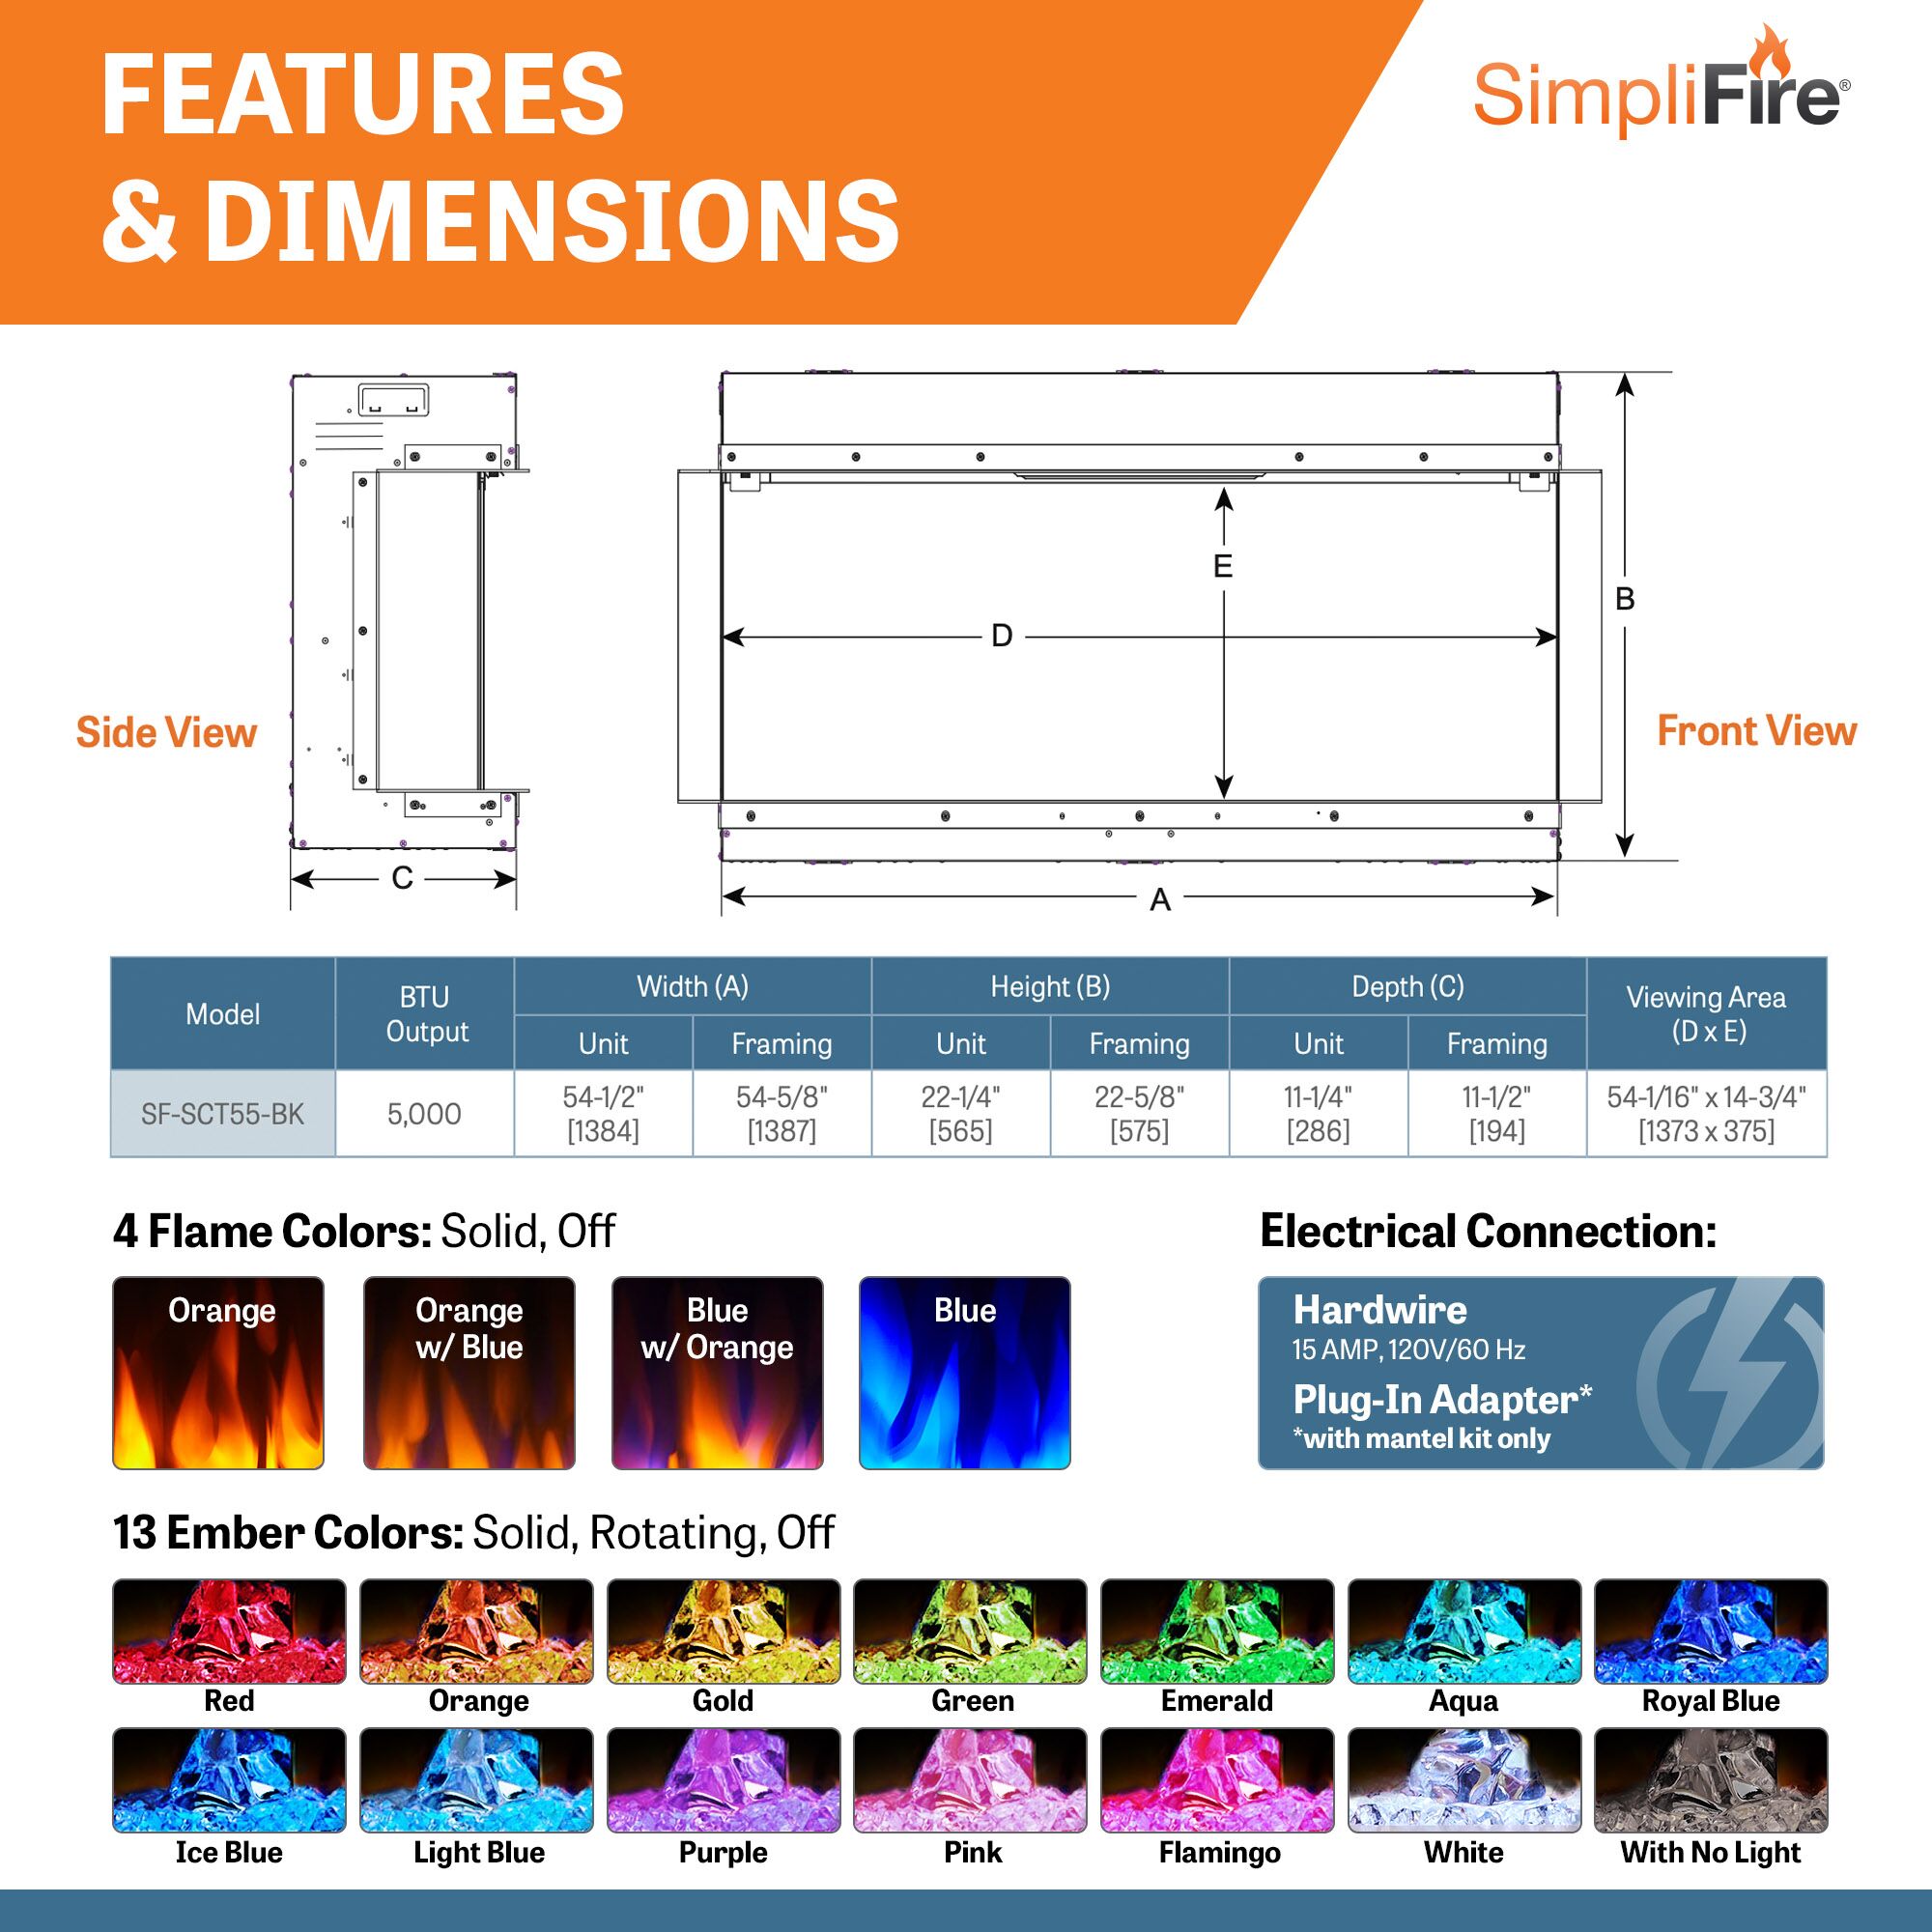 55 inch scion trinity electric fireplace thumbnail image